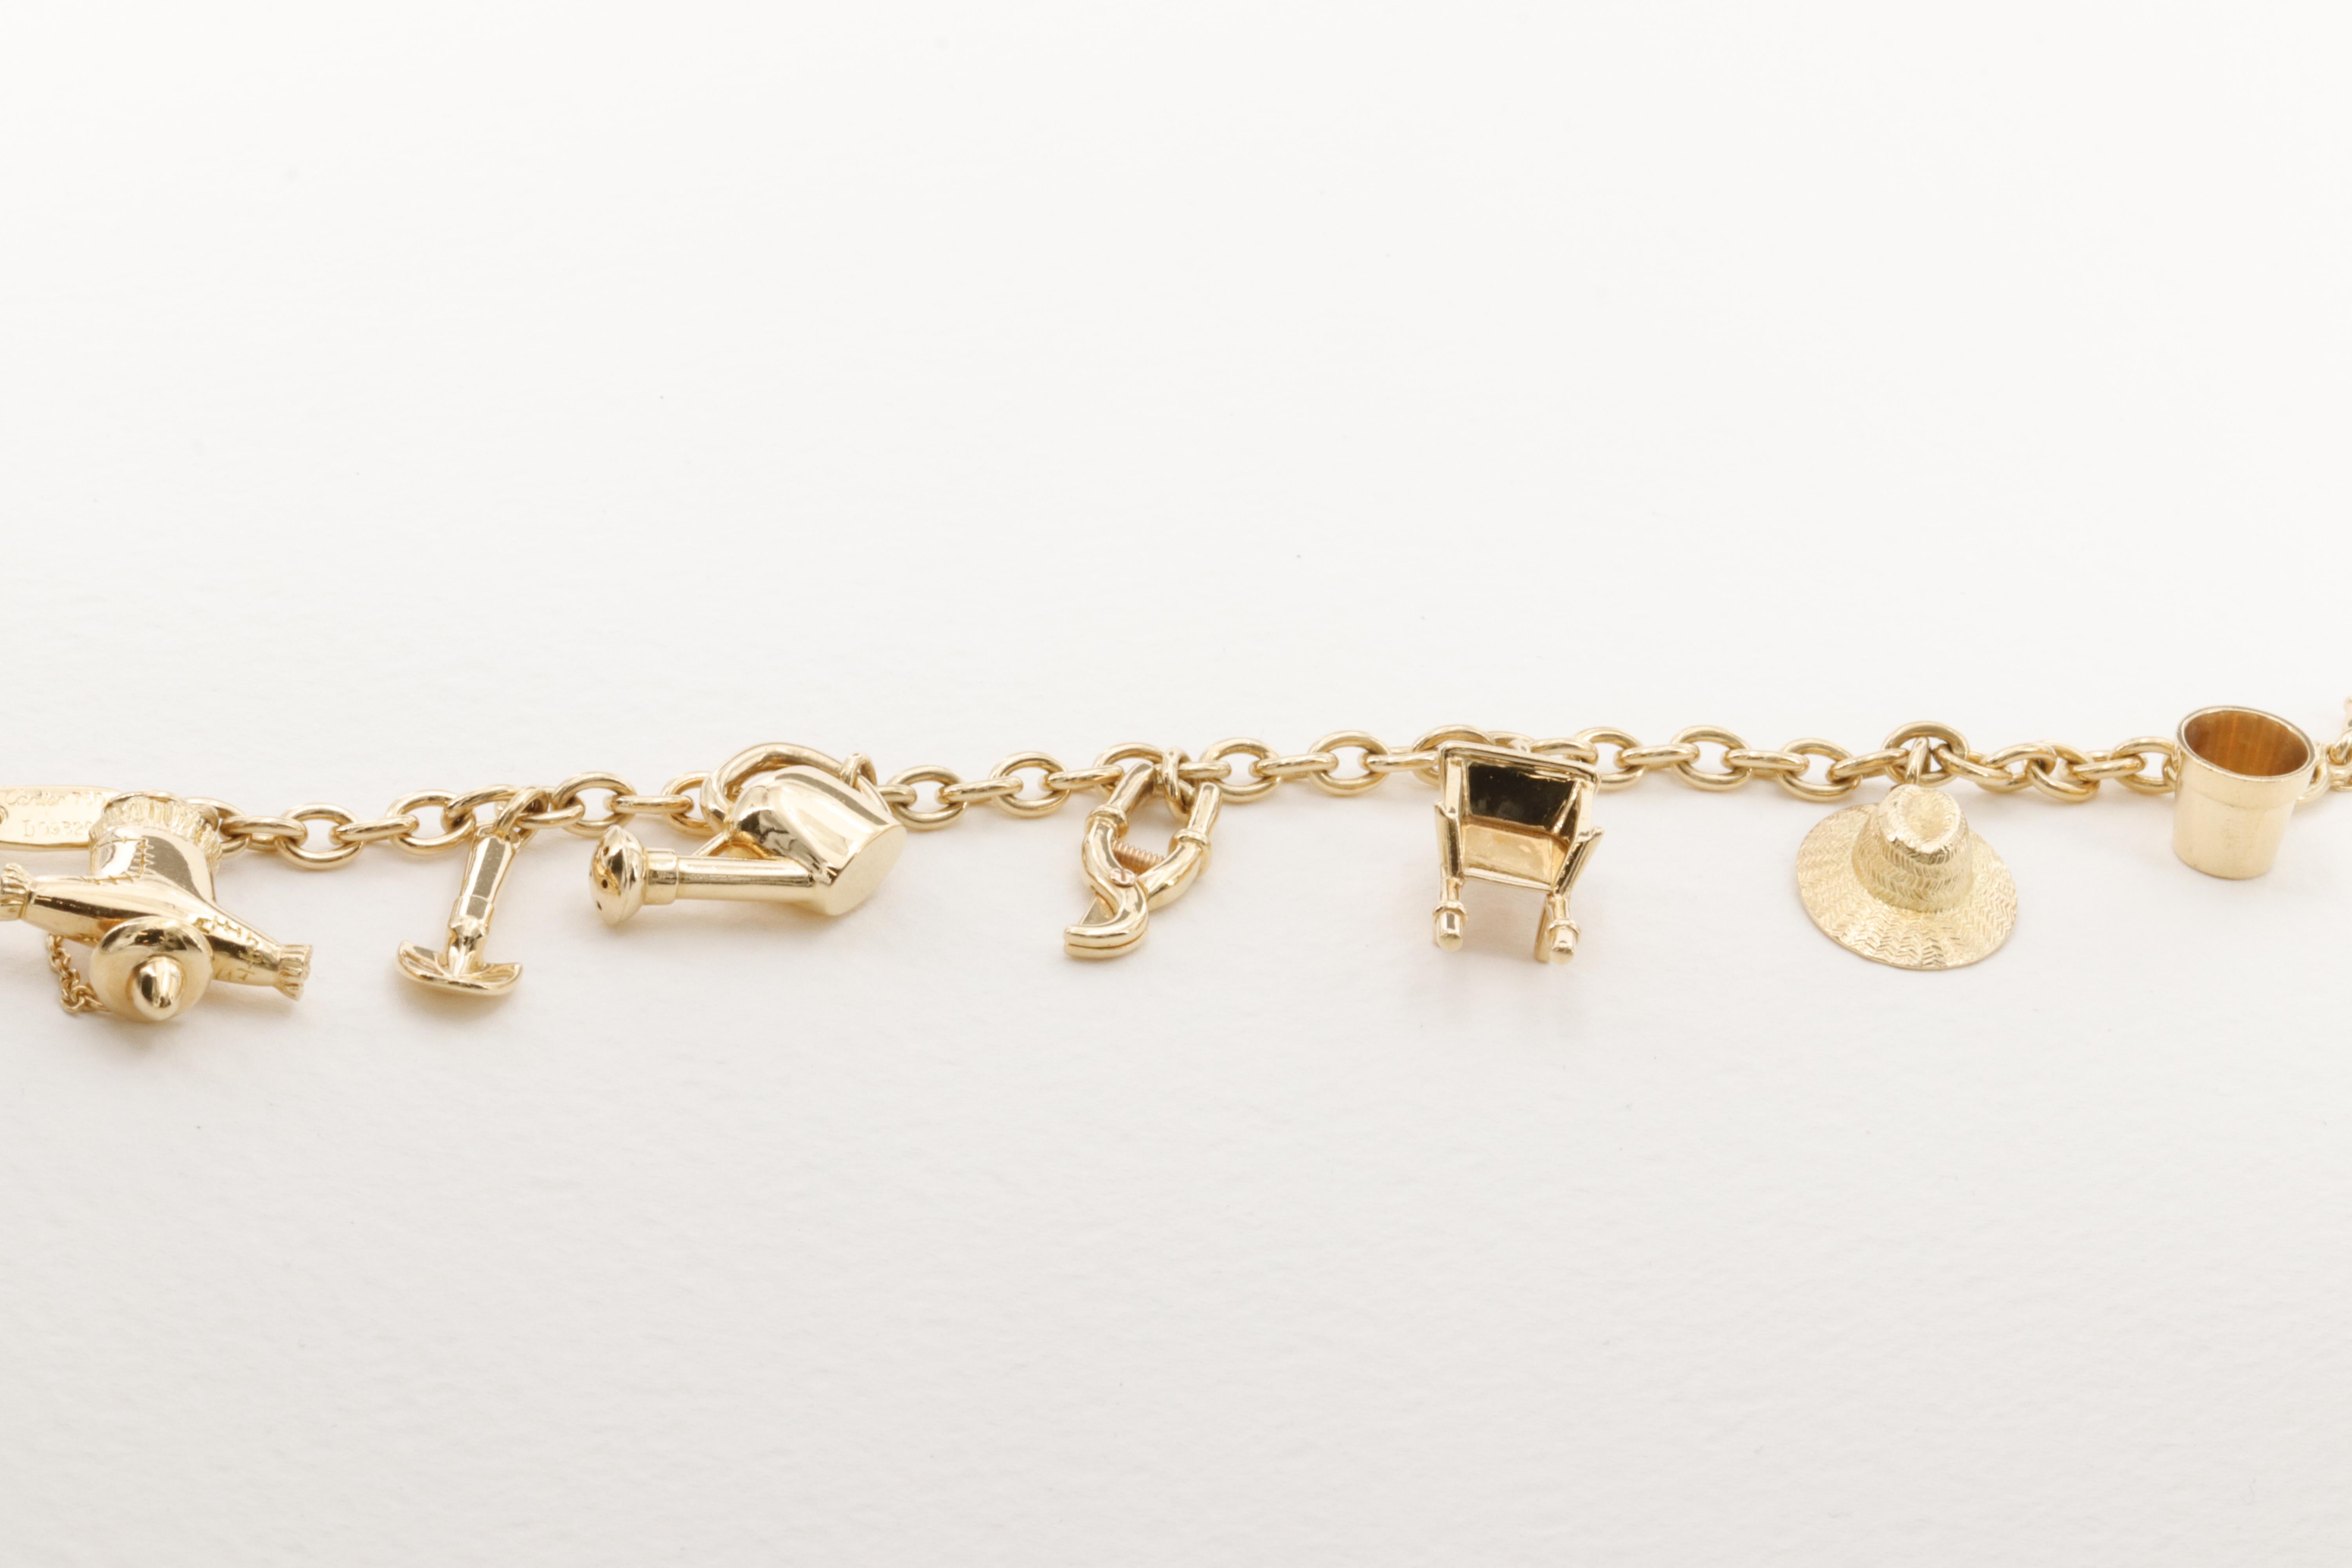 An incredible Cartier 18 karat yellow gold themed charm bracelet featuring 7 gardening inspired charms, from a whimsical scarecrow to a miniature shovel, the 3 dimensional charms are very representative of their real life counterparts. 

The